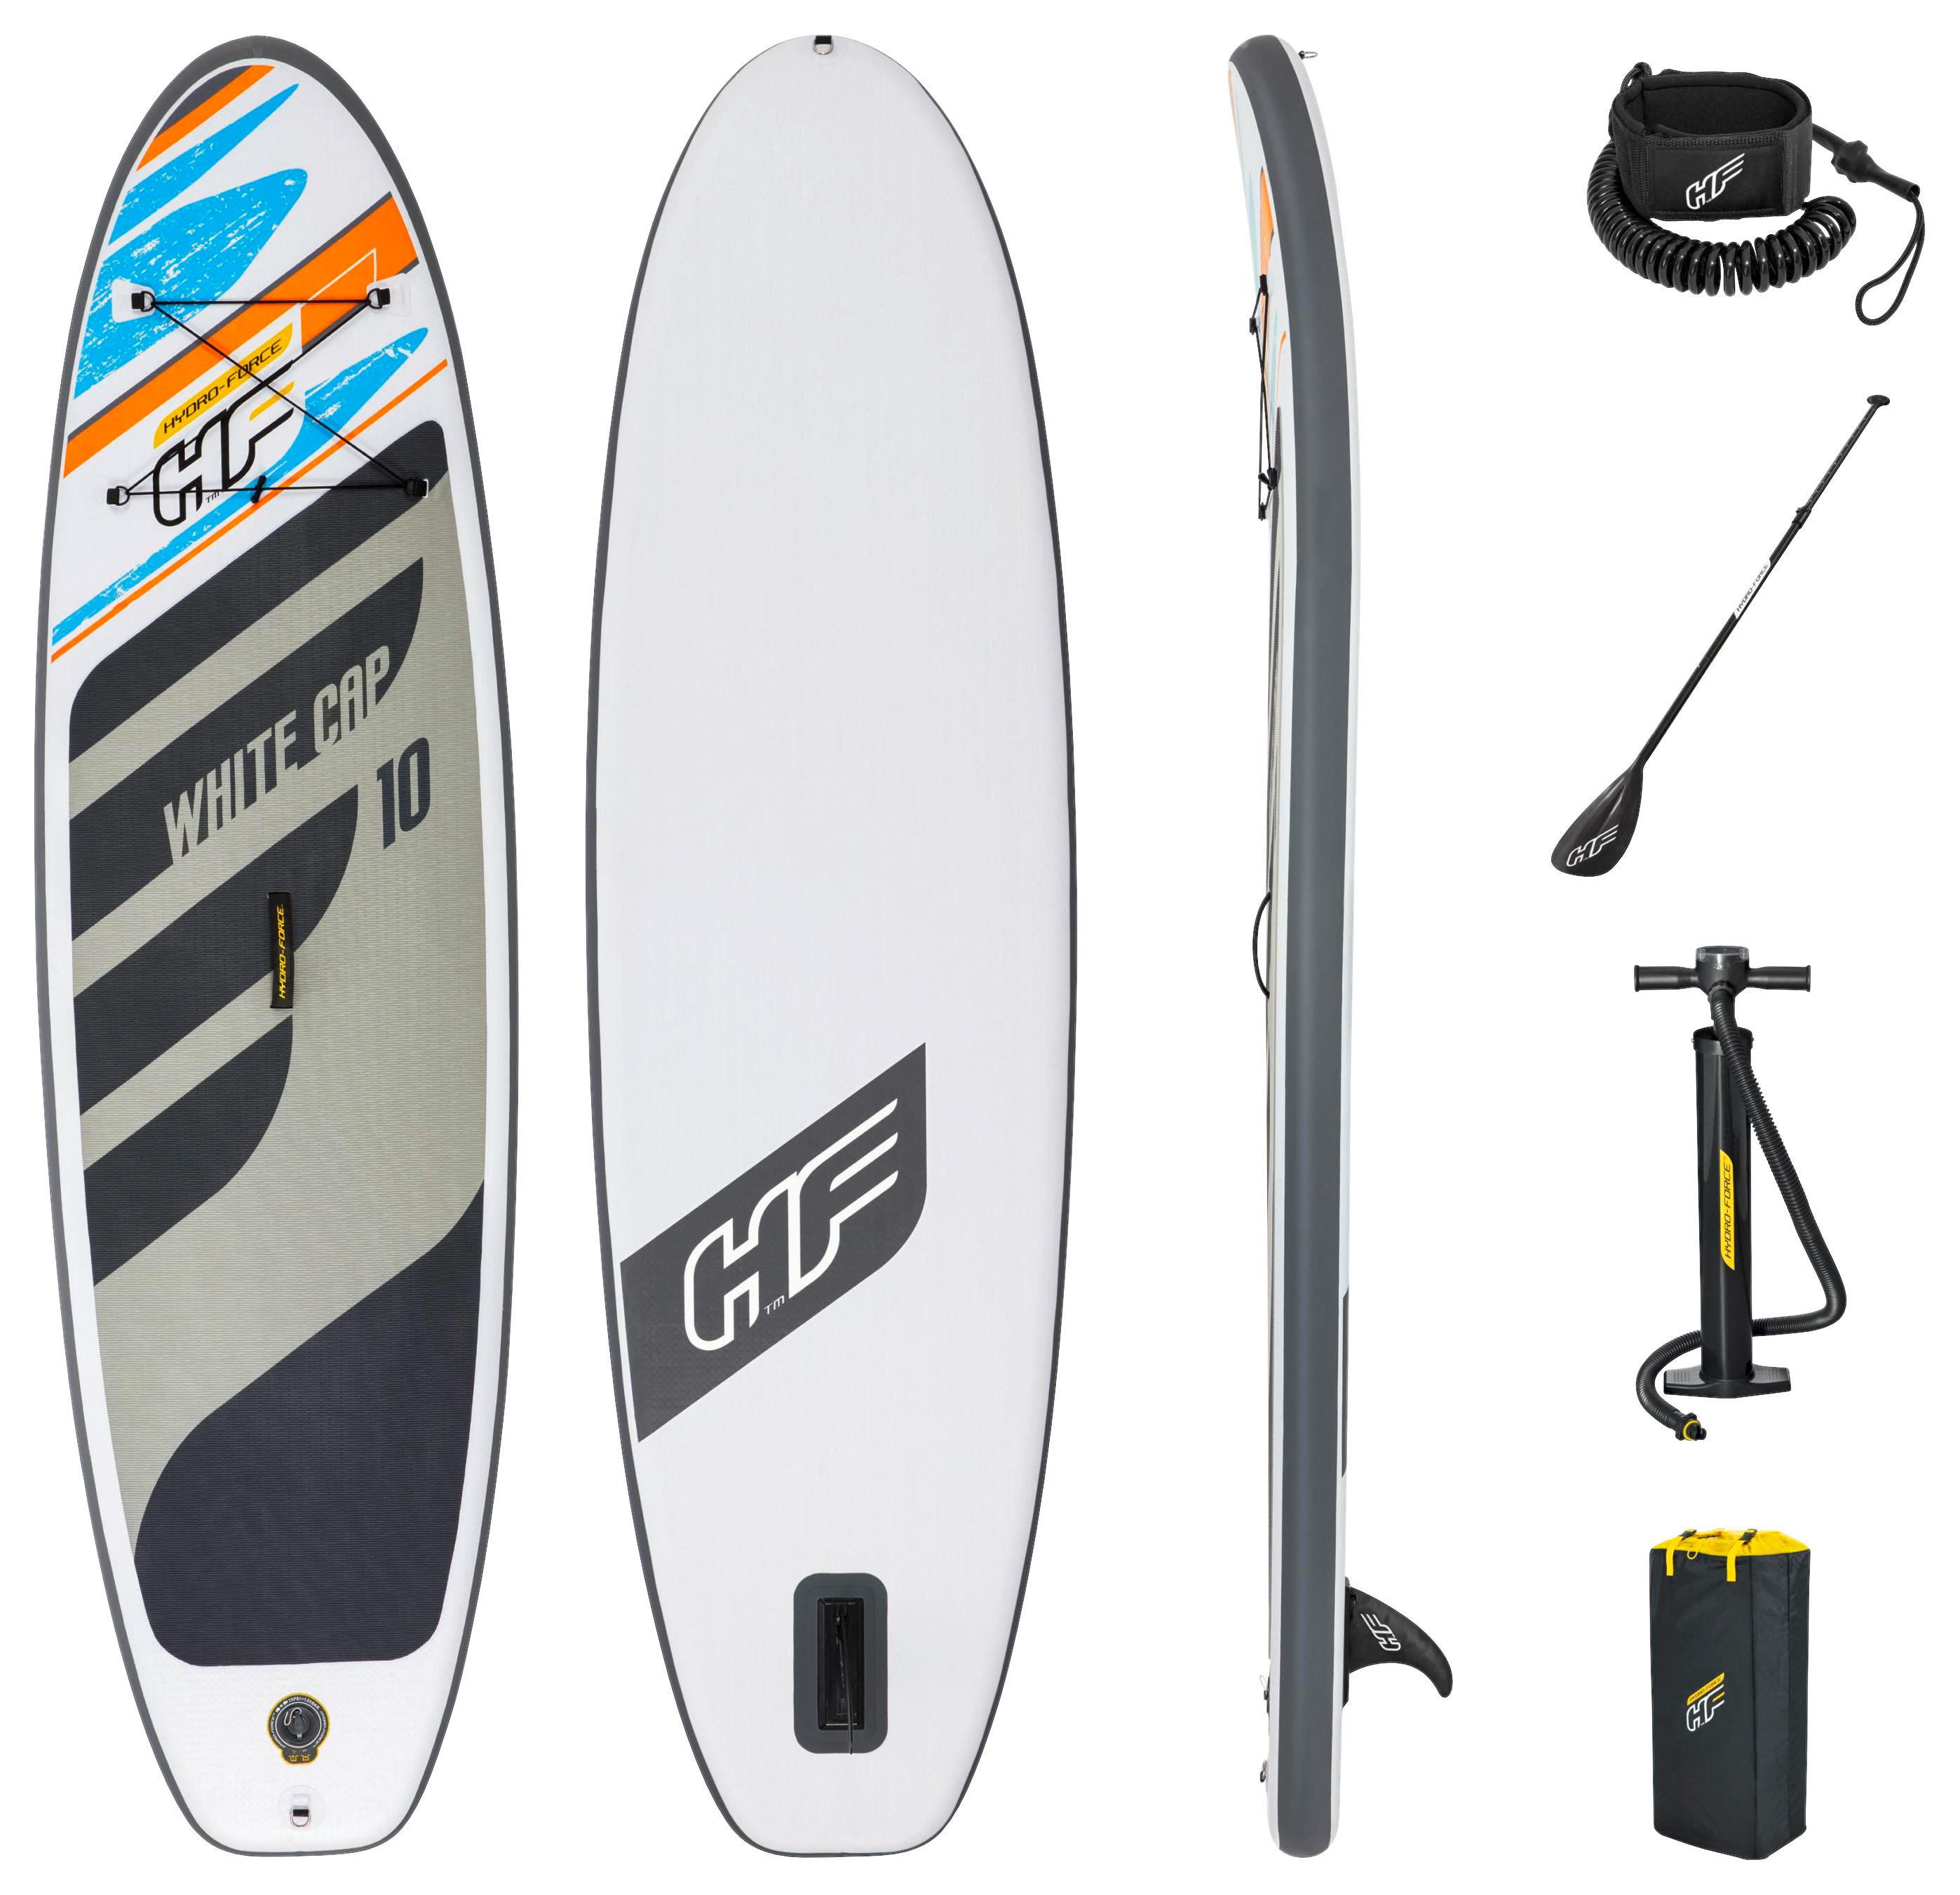 BESTWAY Stand-Up Paddle Board White Cap finden